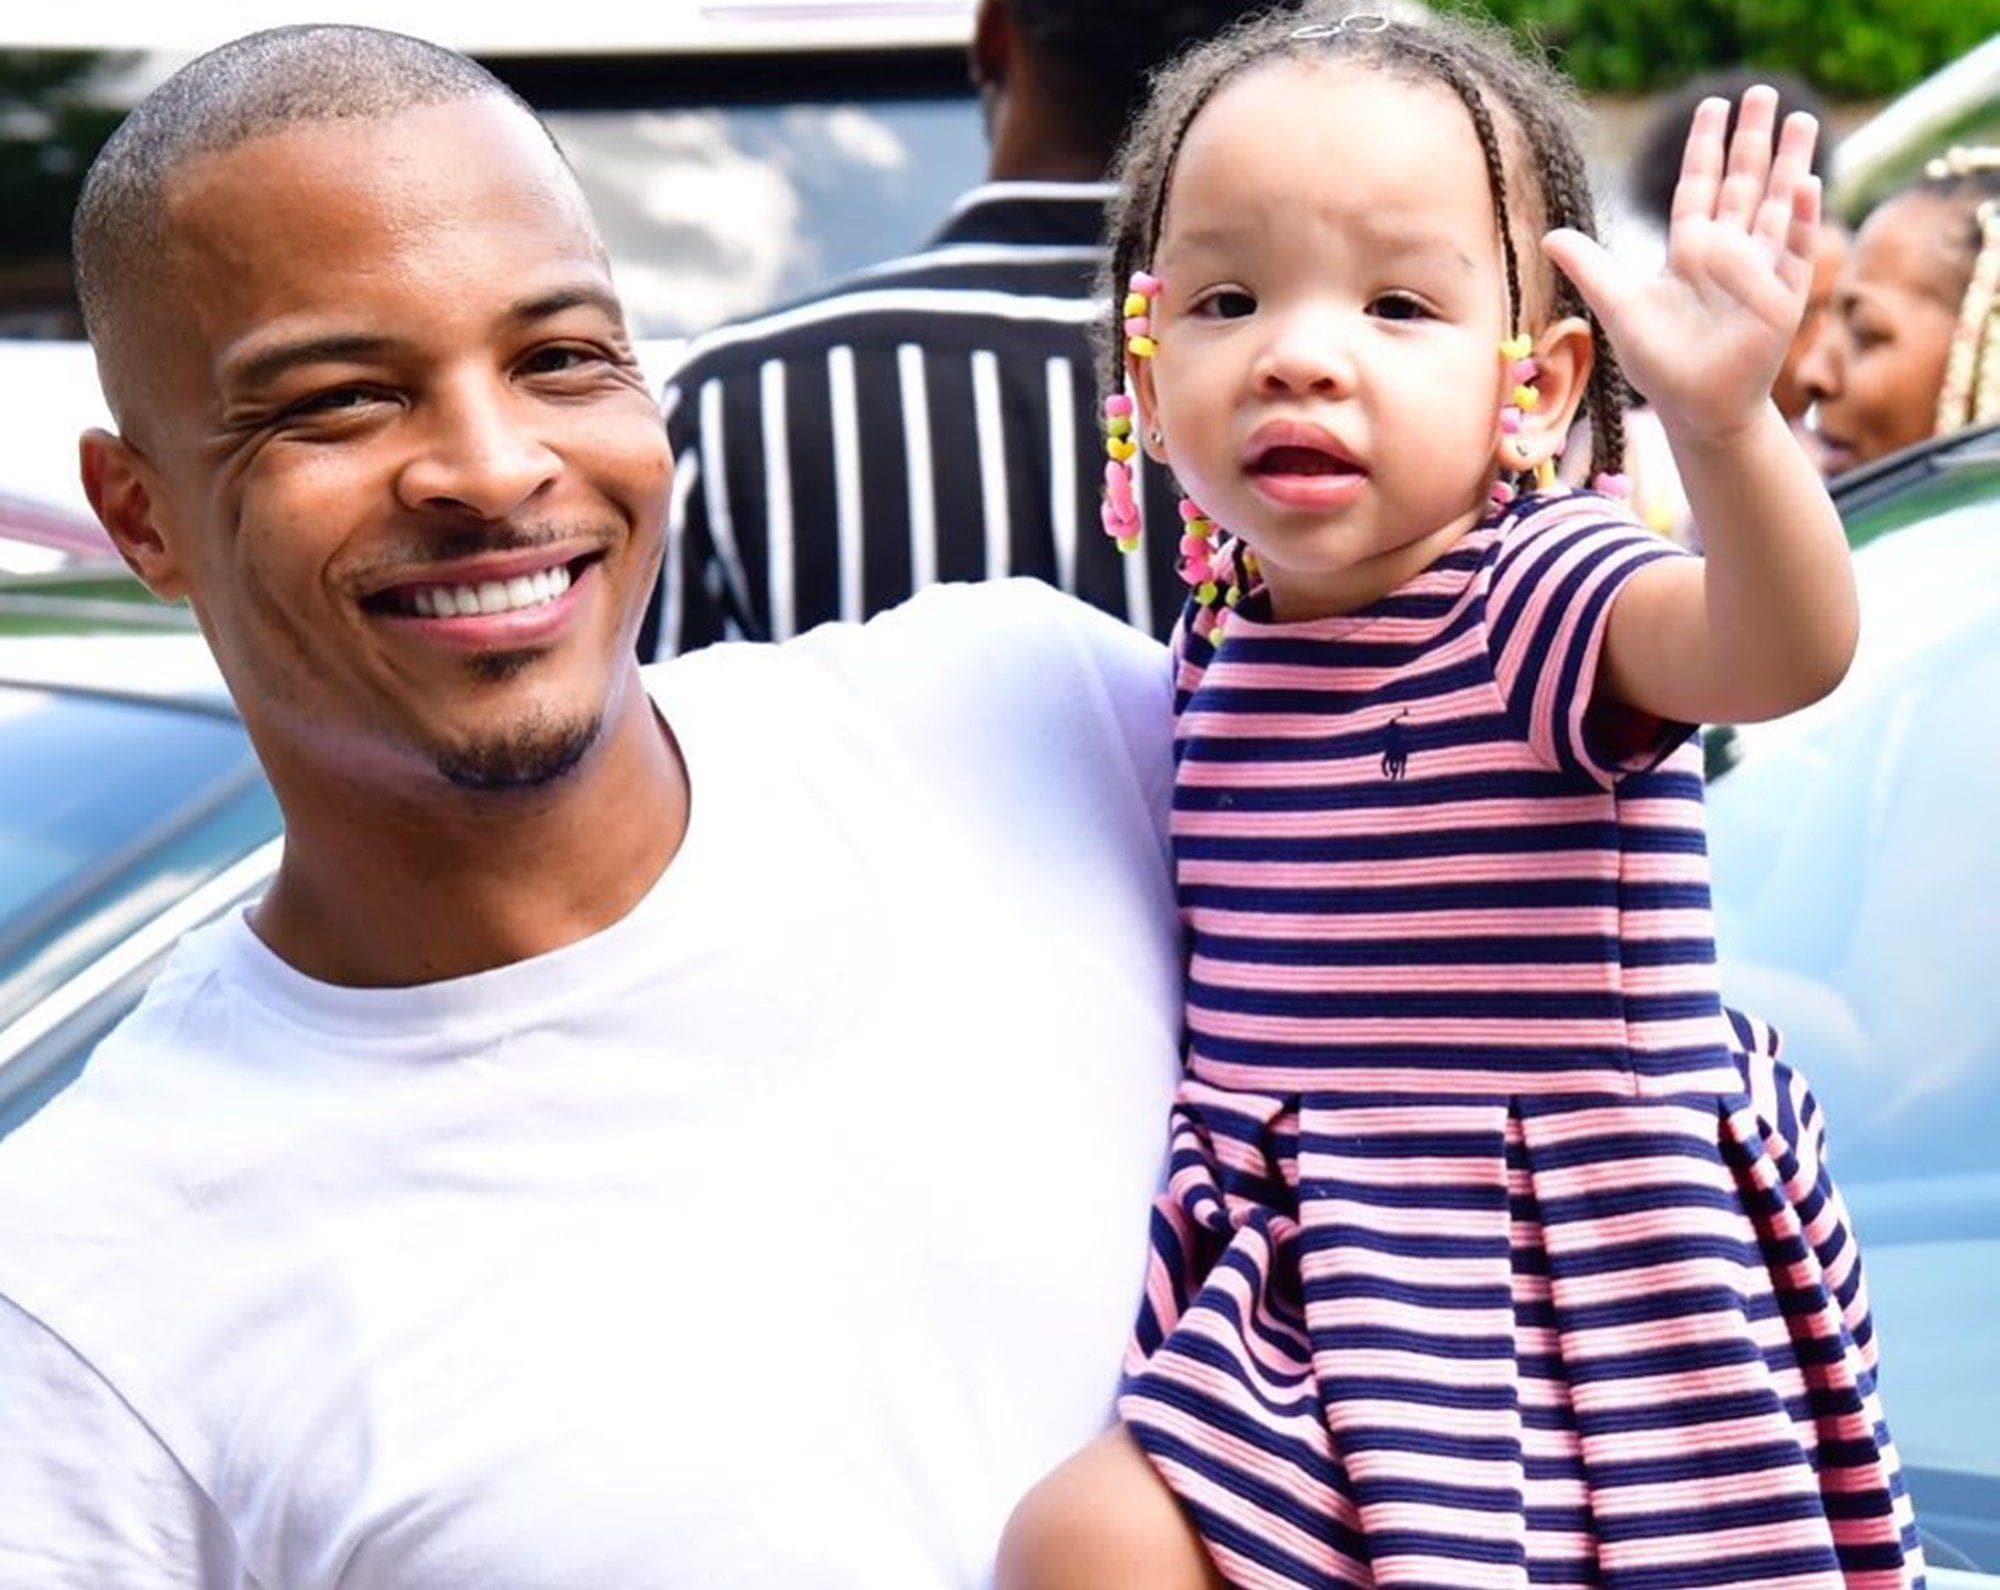 T.I. Proudly Poses With His Daughter, Heiress Harris